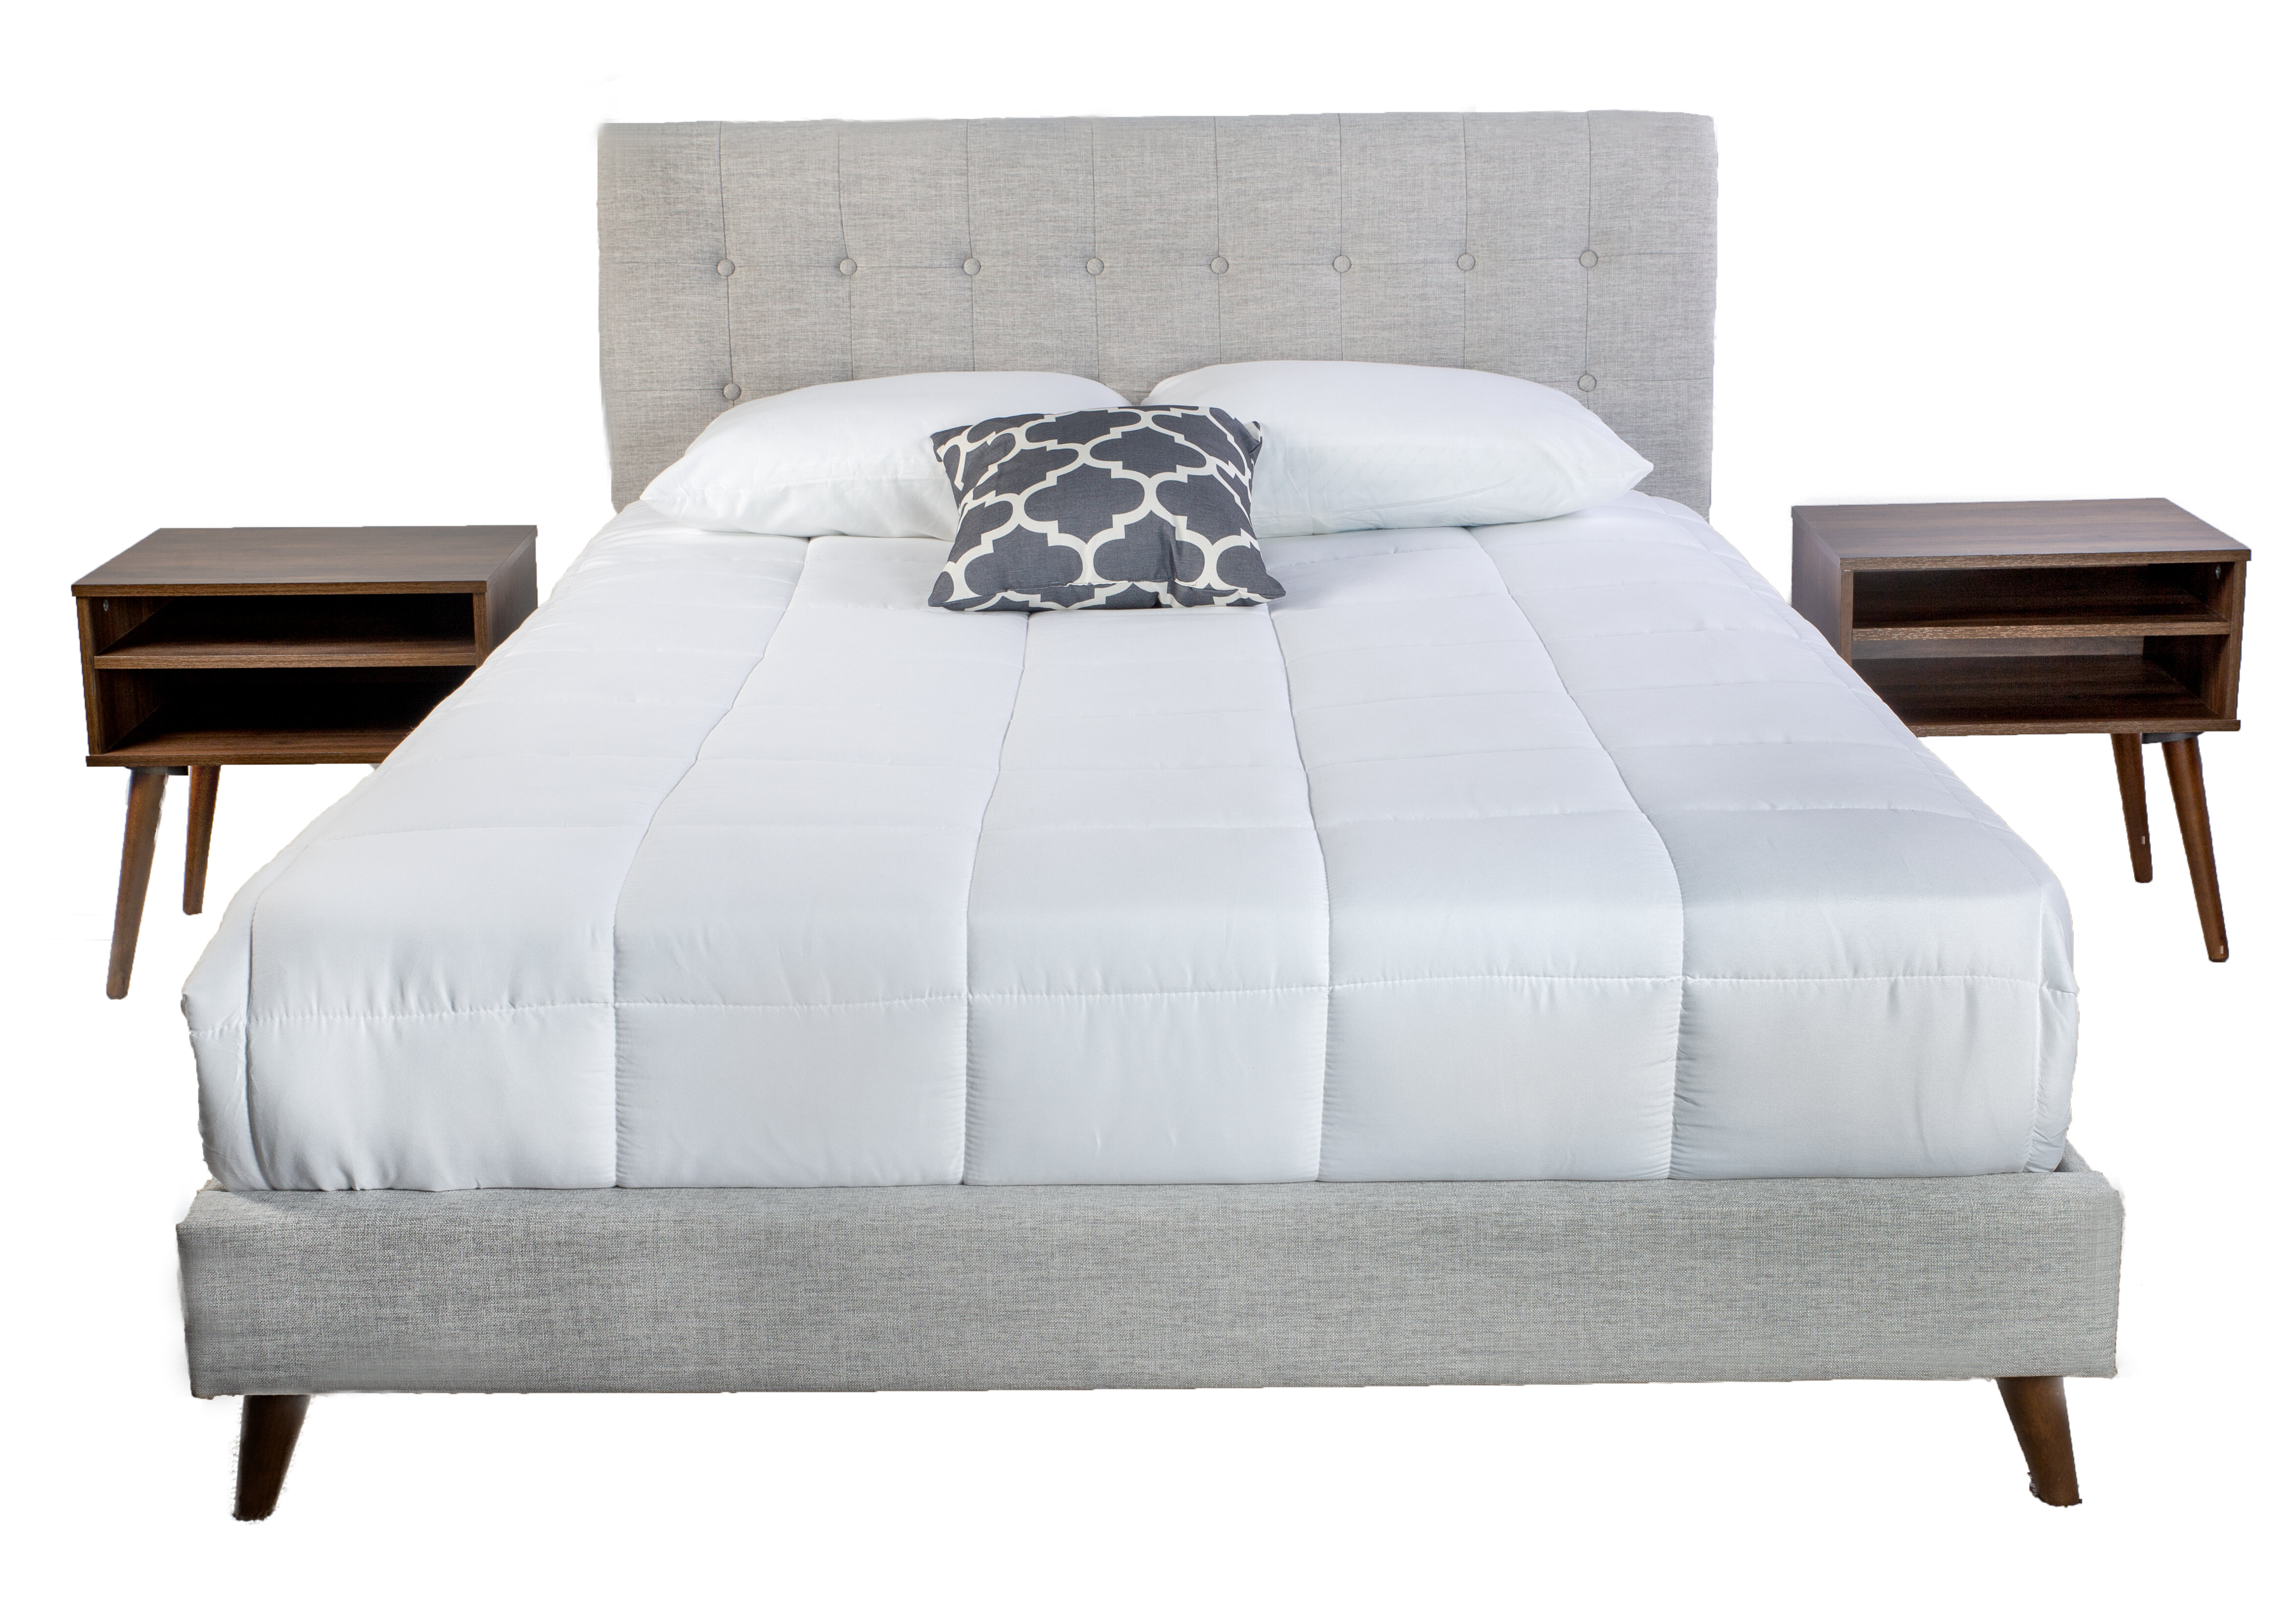 Cheap Bedroom Sets Under 500 You Ll Love In 2021 Wayfair